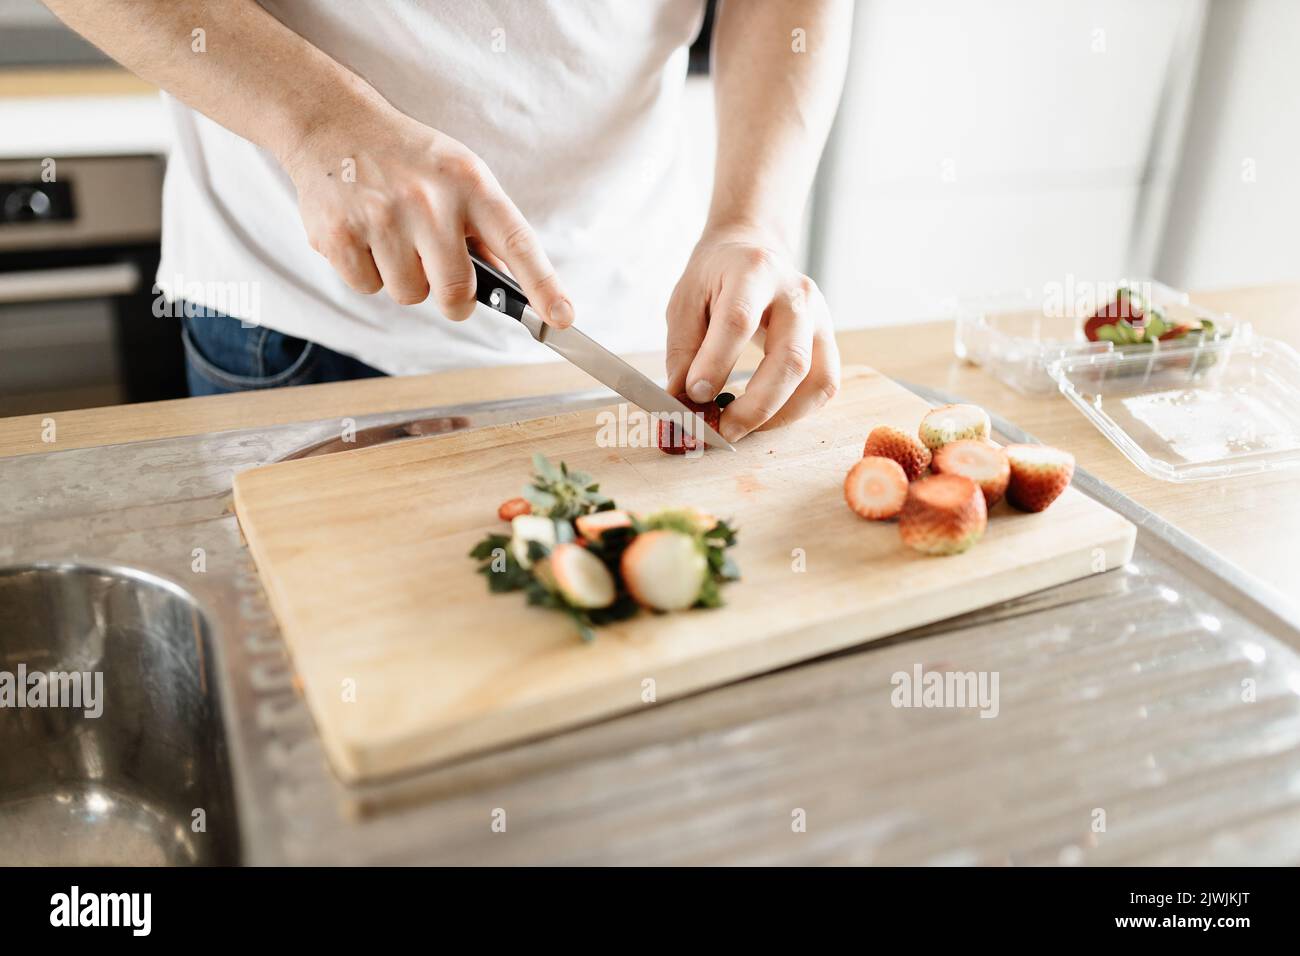 A man wearing a white t-shirt chopping up strawberries in a kitchen on a wooden board with a knife Stock Photo